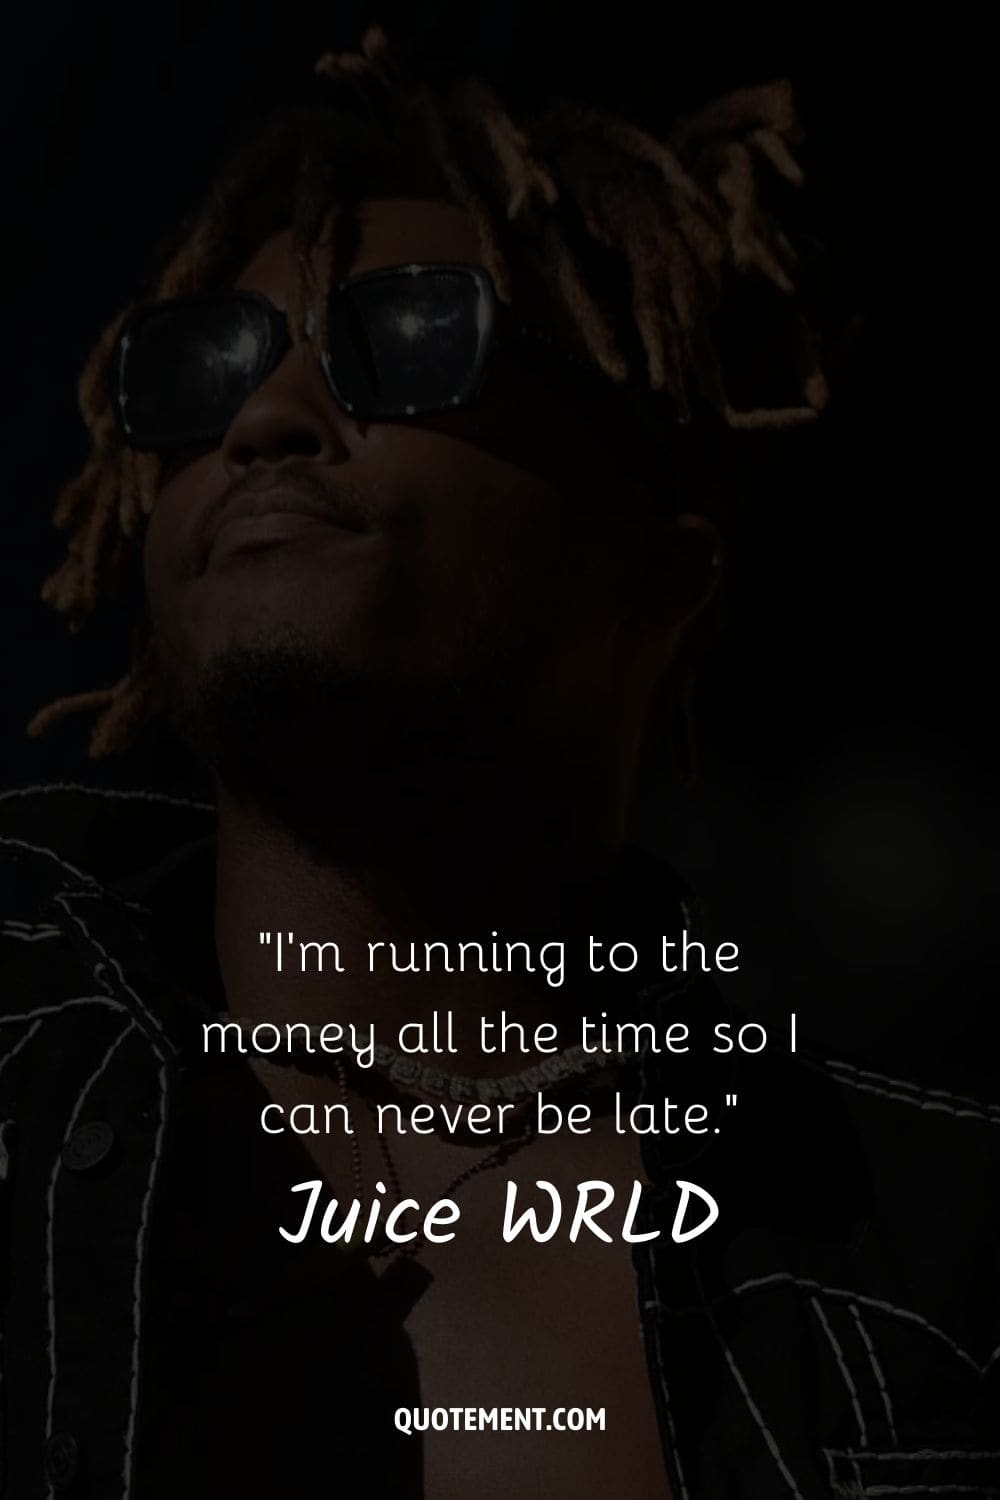 I’m running to the money all the time so I can never be late.